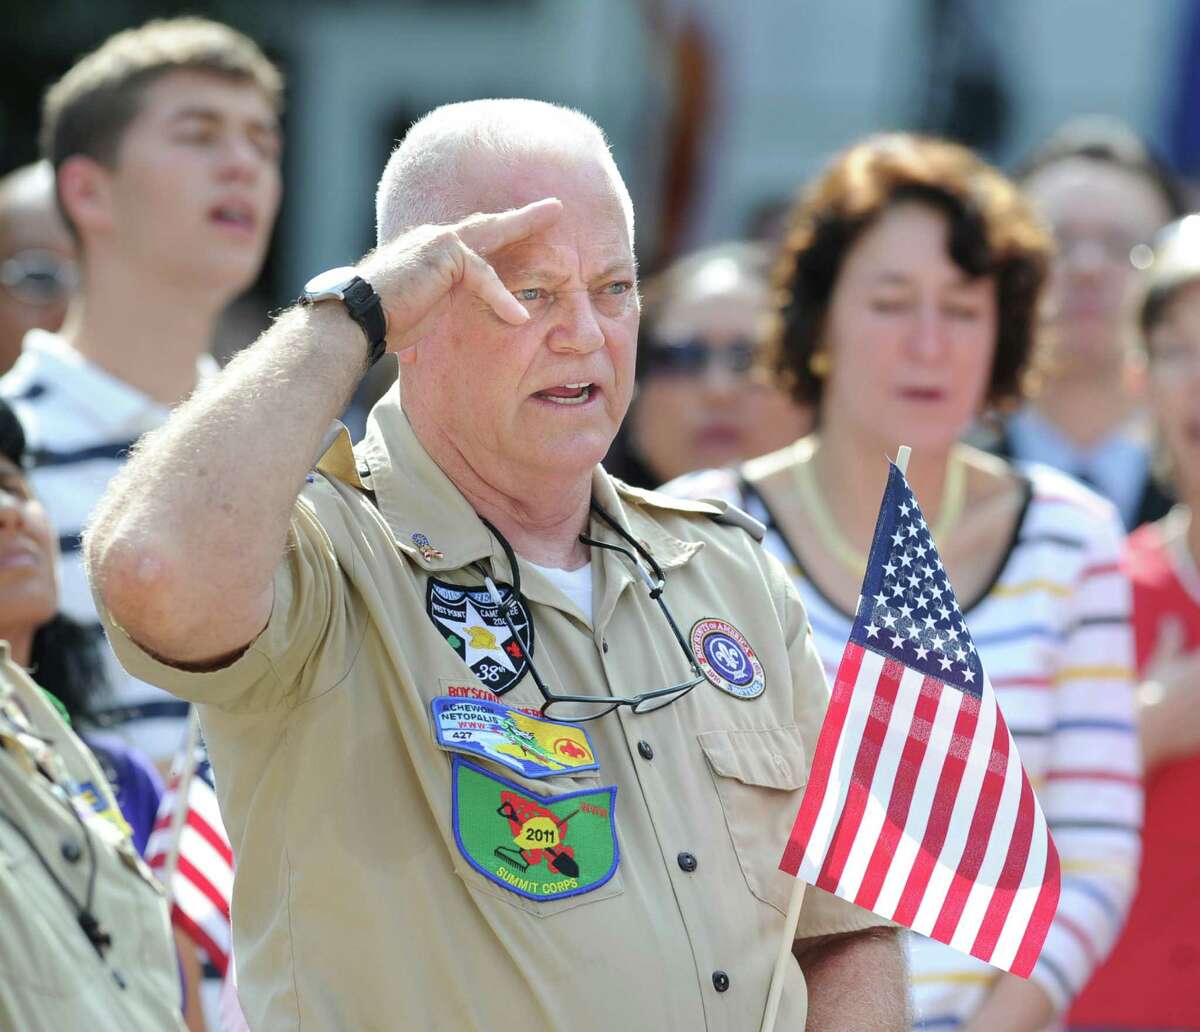 Boy Scout Troop 35 leader Rich Rooney of Greenwich salutes the American flag during the Fourth of July ceremony at Greenwich Town Hall, Wednesday morning, July 4, 2012.